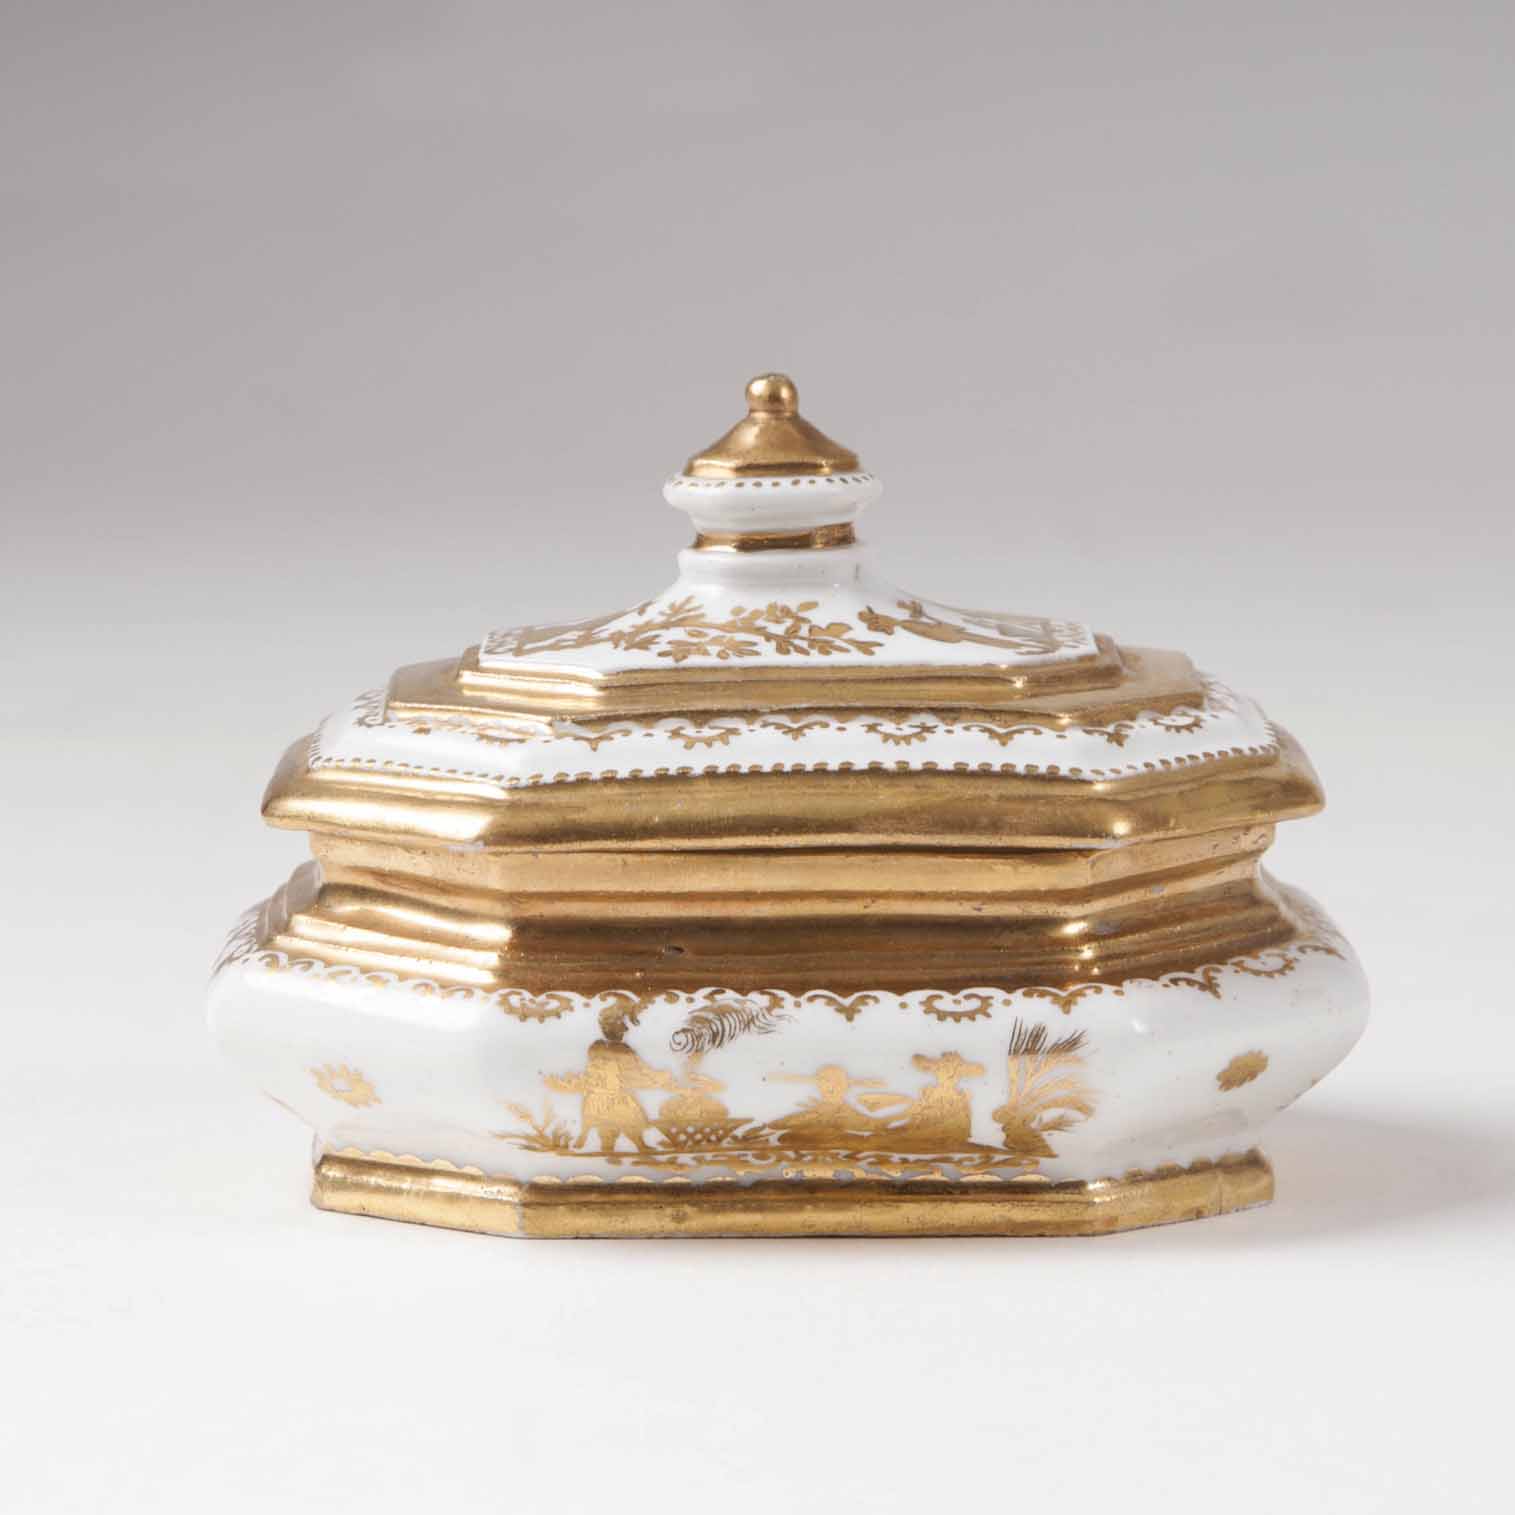 A rare Böttger sugar-box with gold chinoiseries from Augsburg - image 6